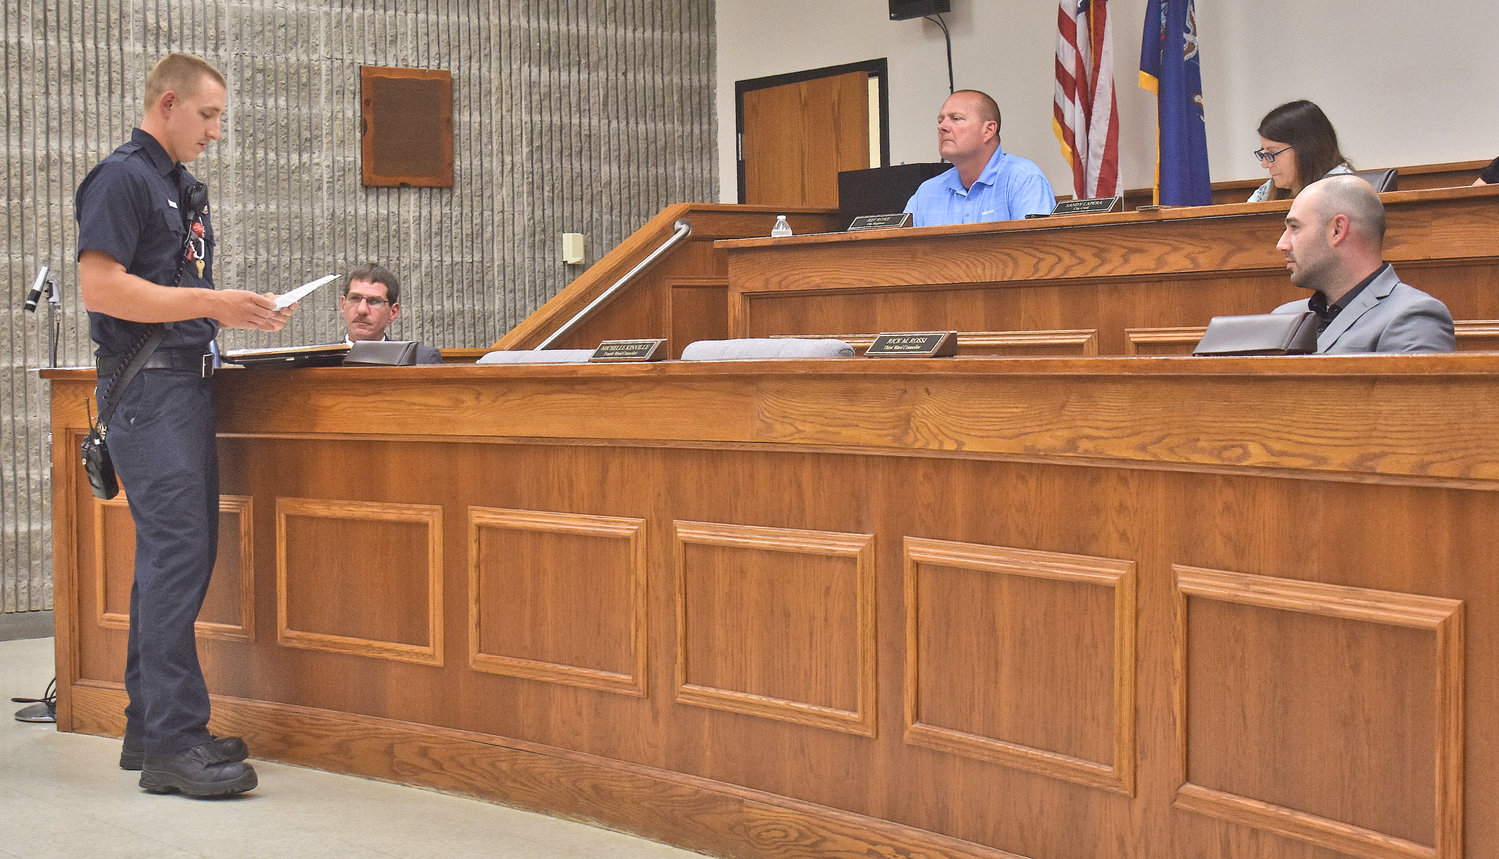 At an Oneida Common Council meeting on June 7, 2022, Oneida City Fire Marshal Brian Burkle presents information about the building located at 140 Madison Street.